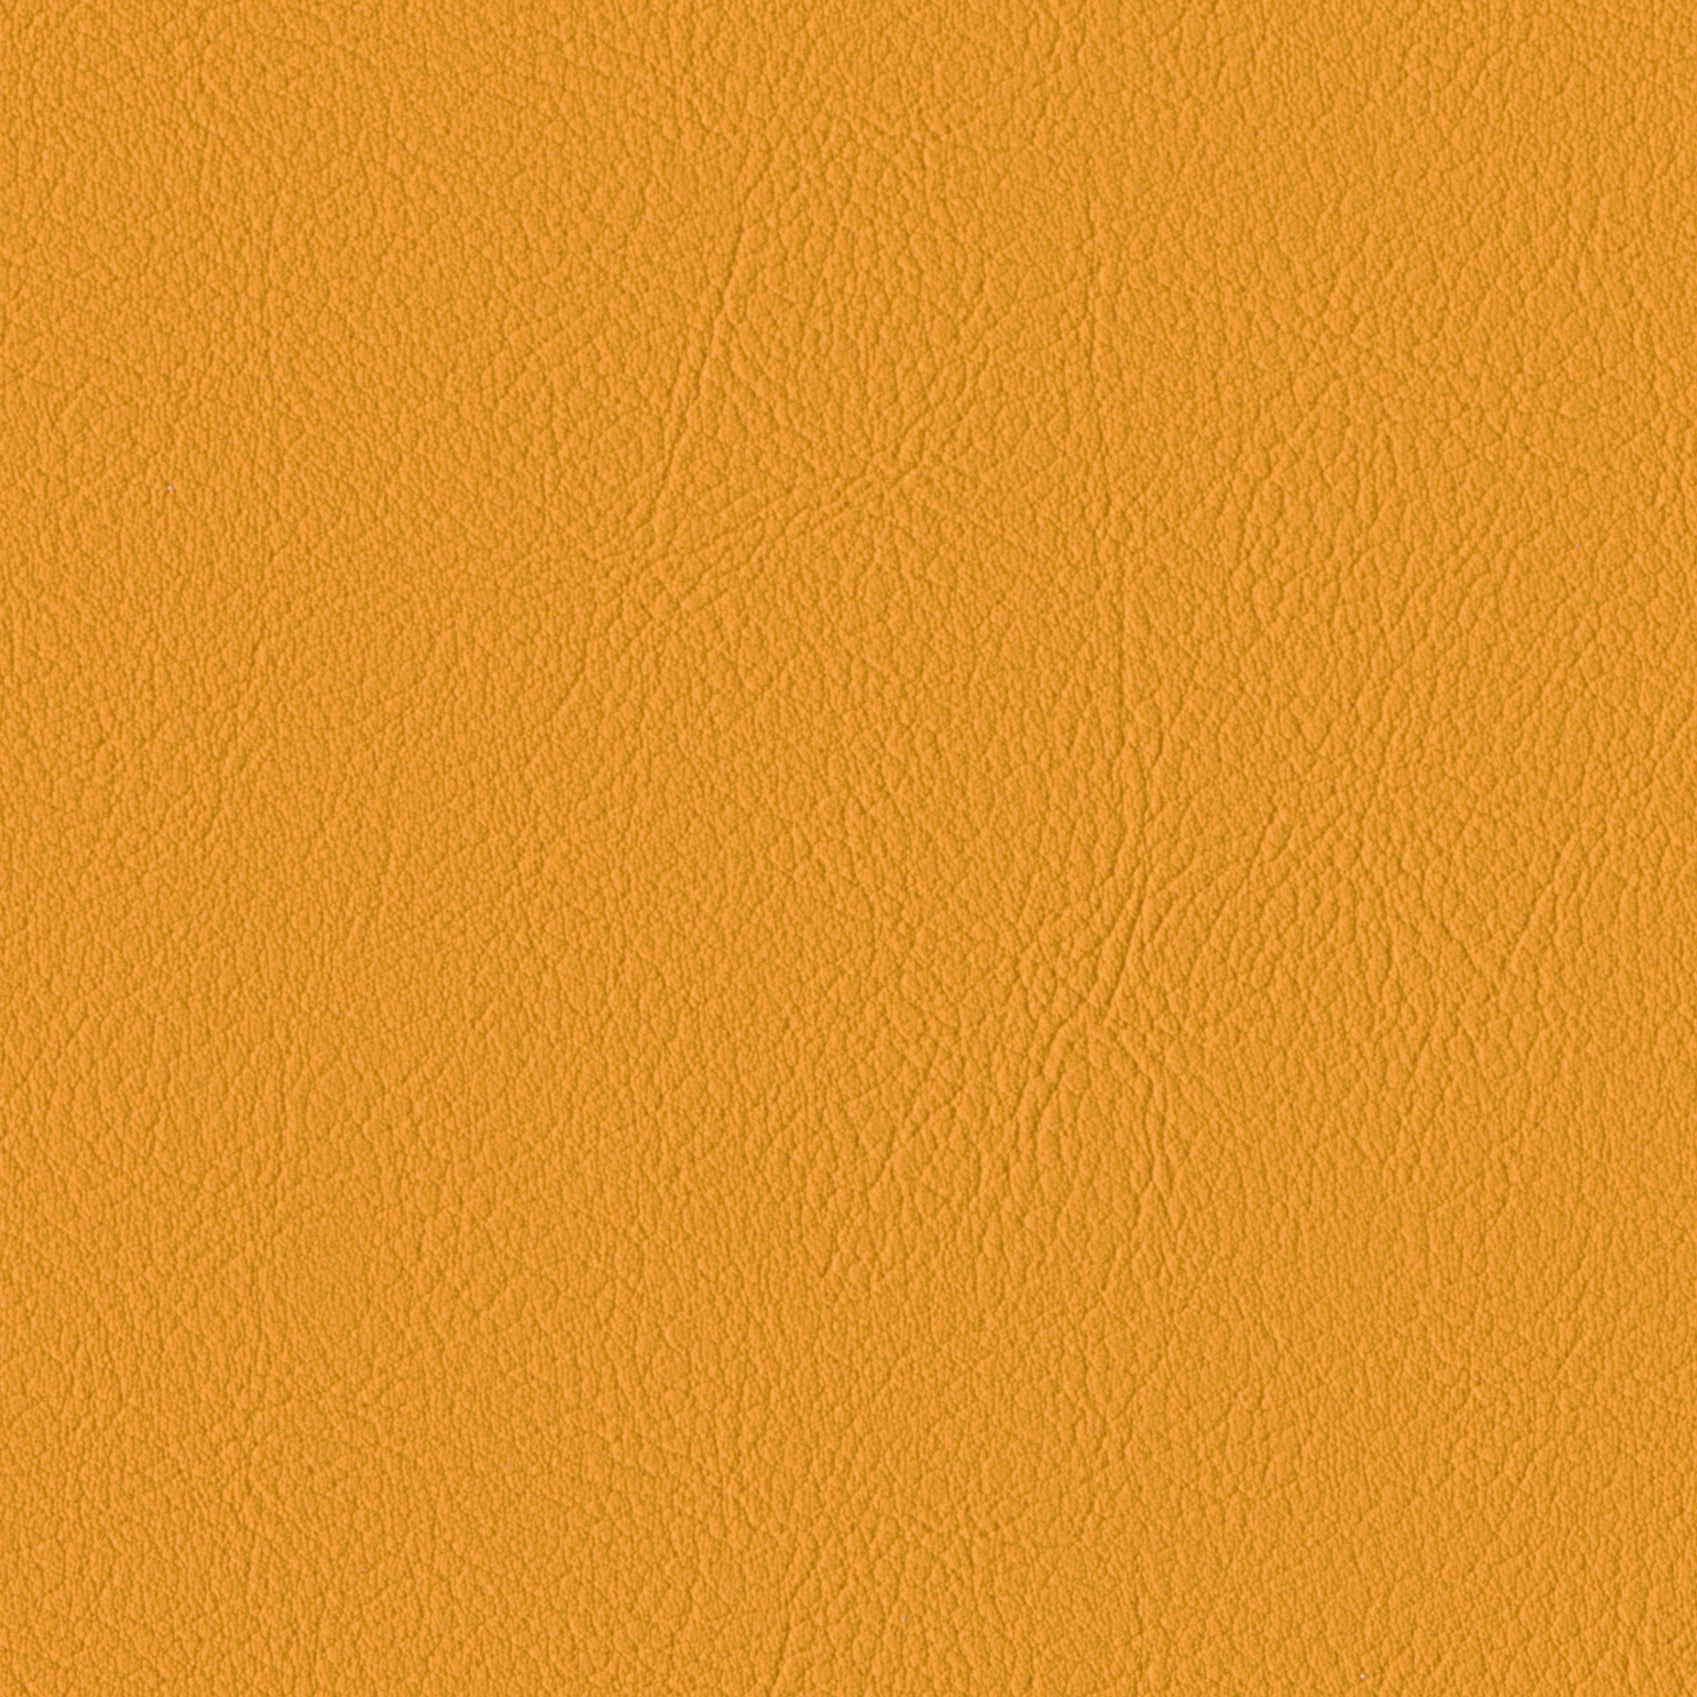    Andriali-Contract-Vinyl_Upholstery-Design-LegacyFR-Color-130Apricot-Width-140cm